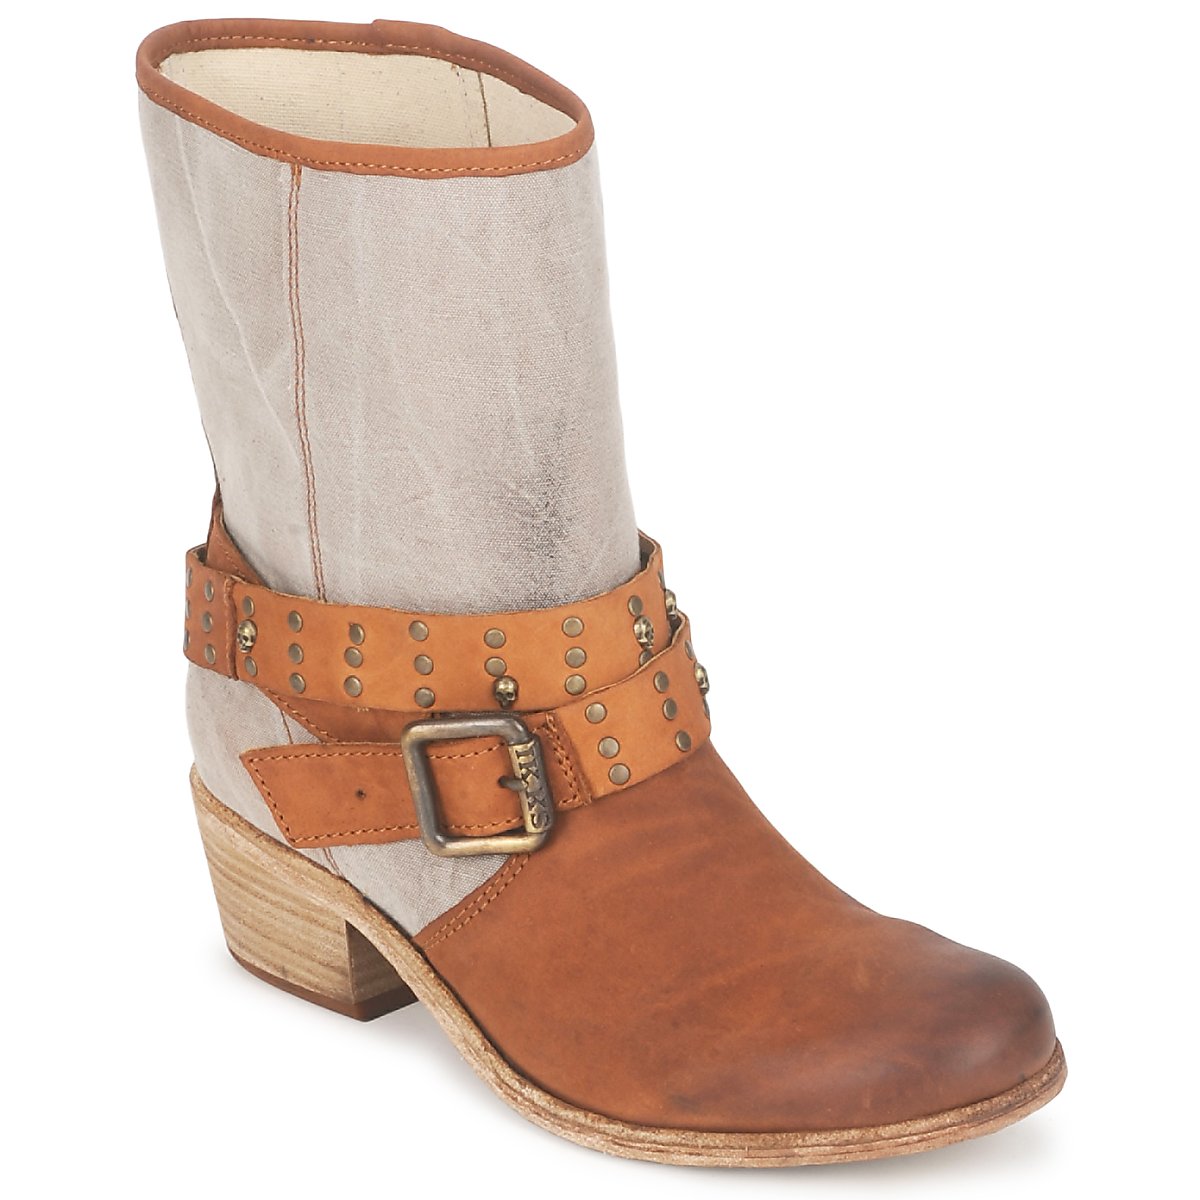 Shoes Women Boots Ikks INES Brown / Taupe